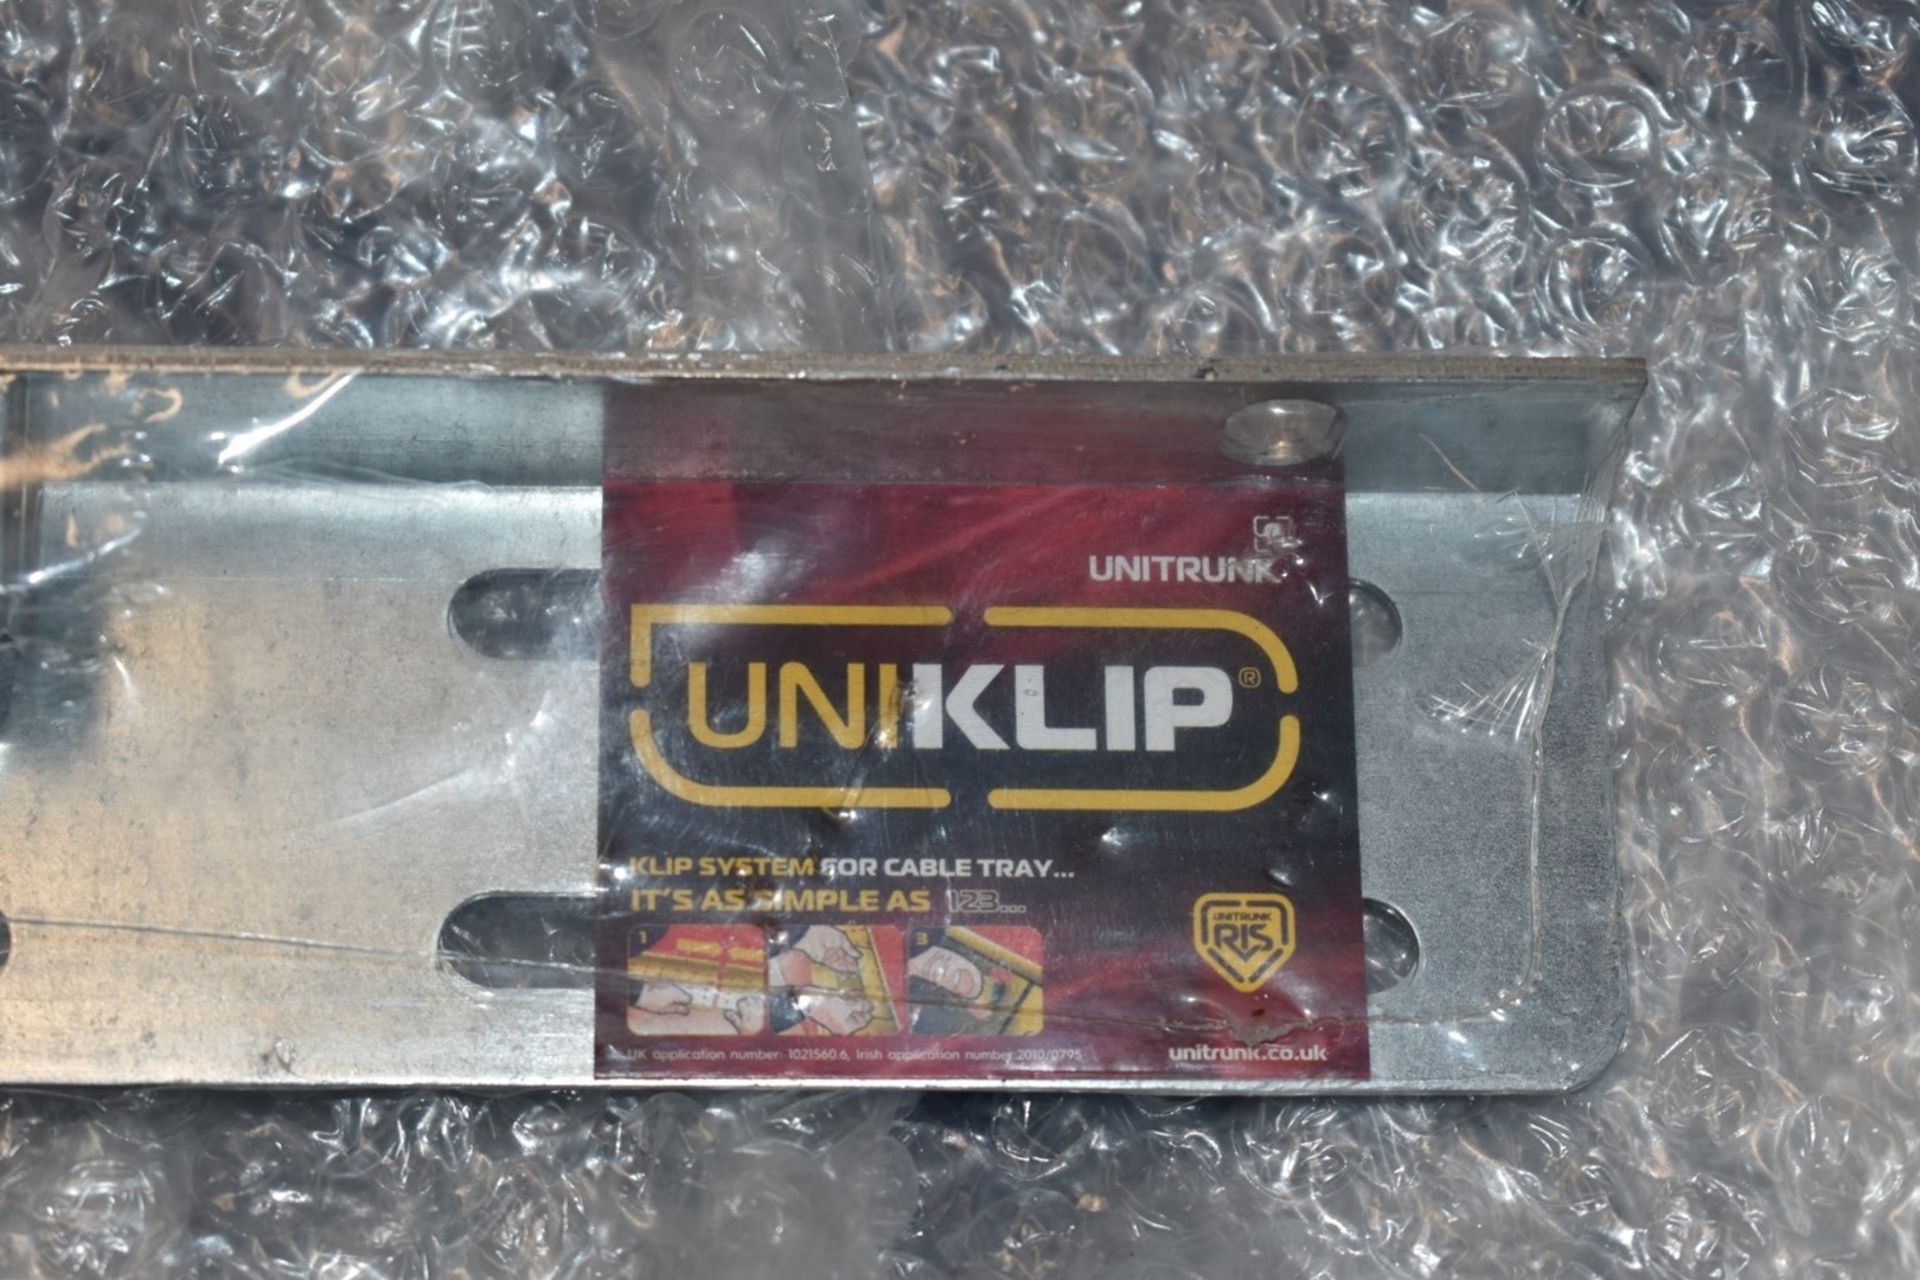 60 x Sets of Unitrunk Uniklip Straight Couplers For Cable Trays Brand New Stock - Image 4 of 5